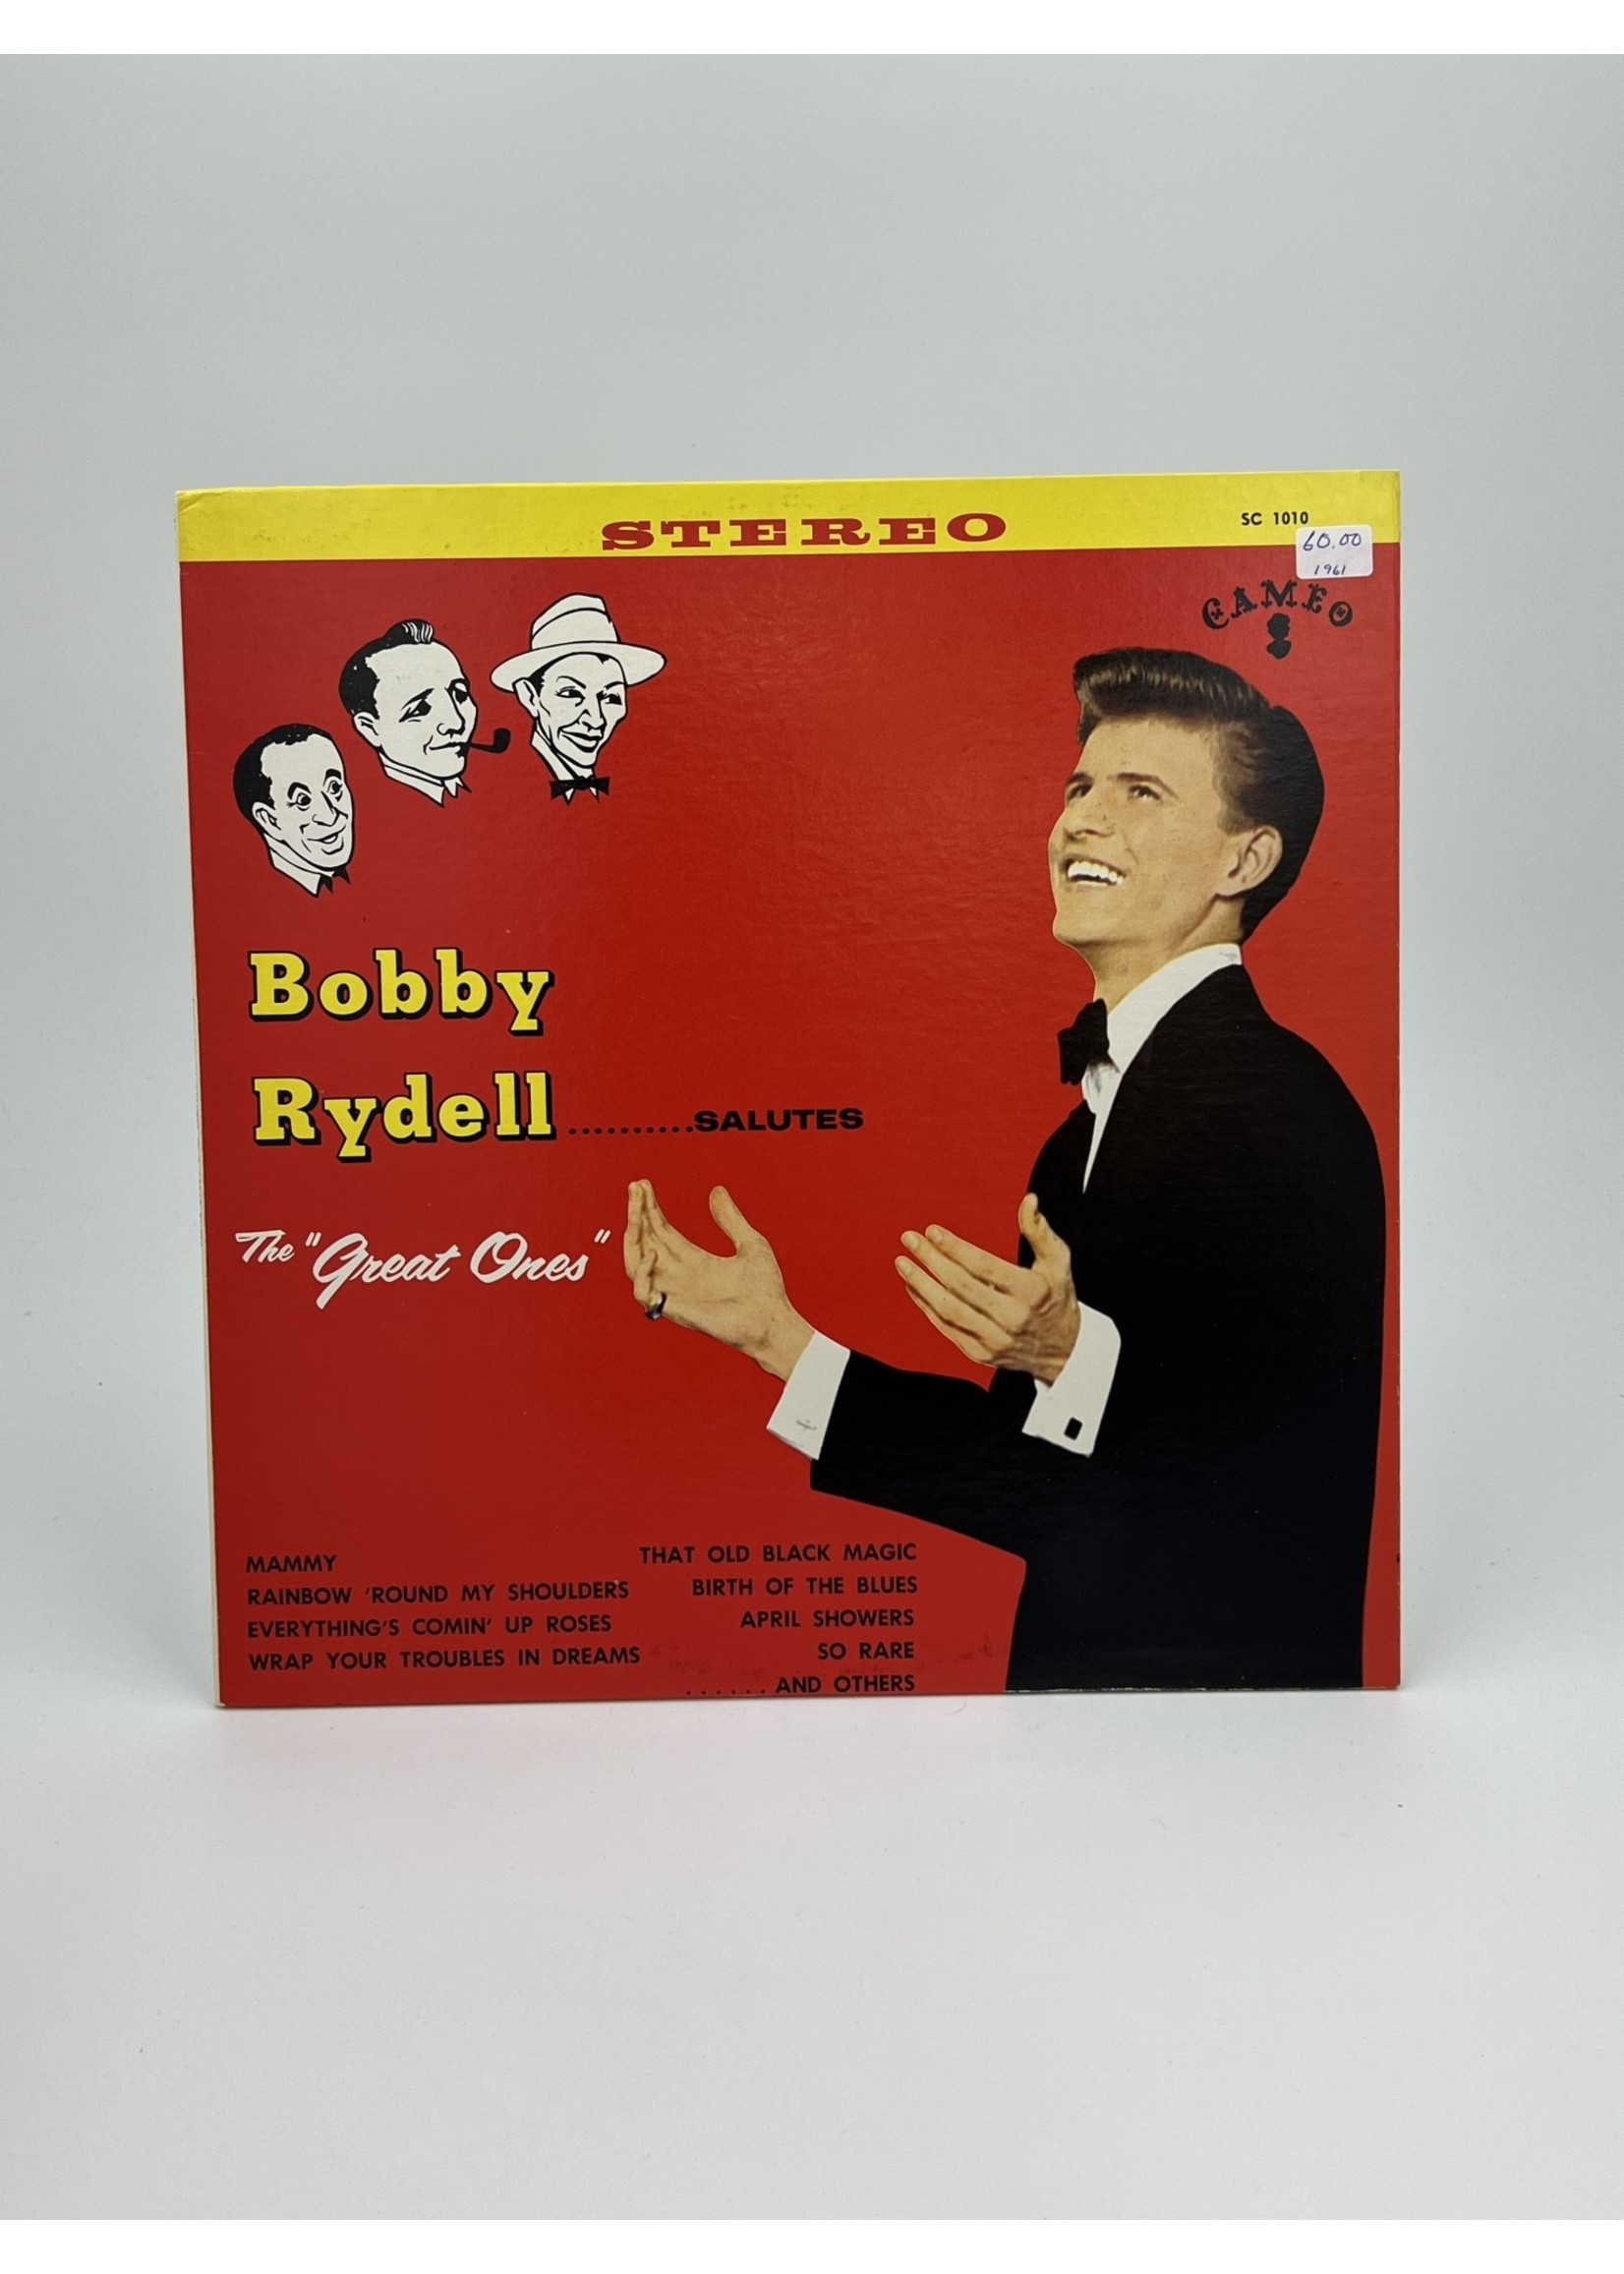 LP Bobby Rydell Salutes The Great Ones LP Record